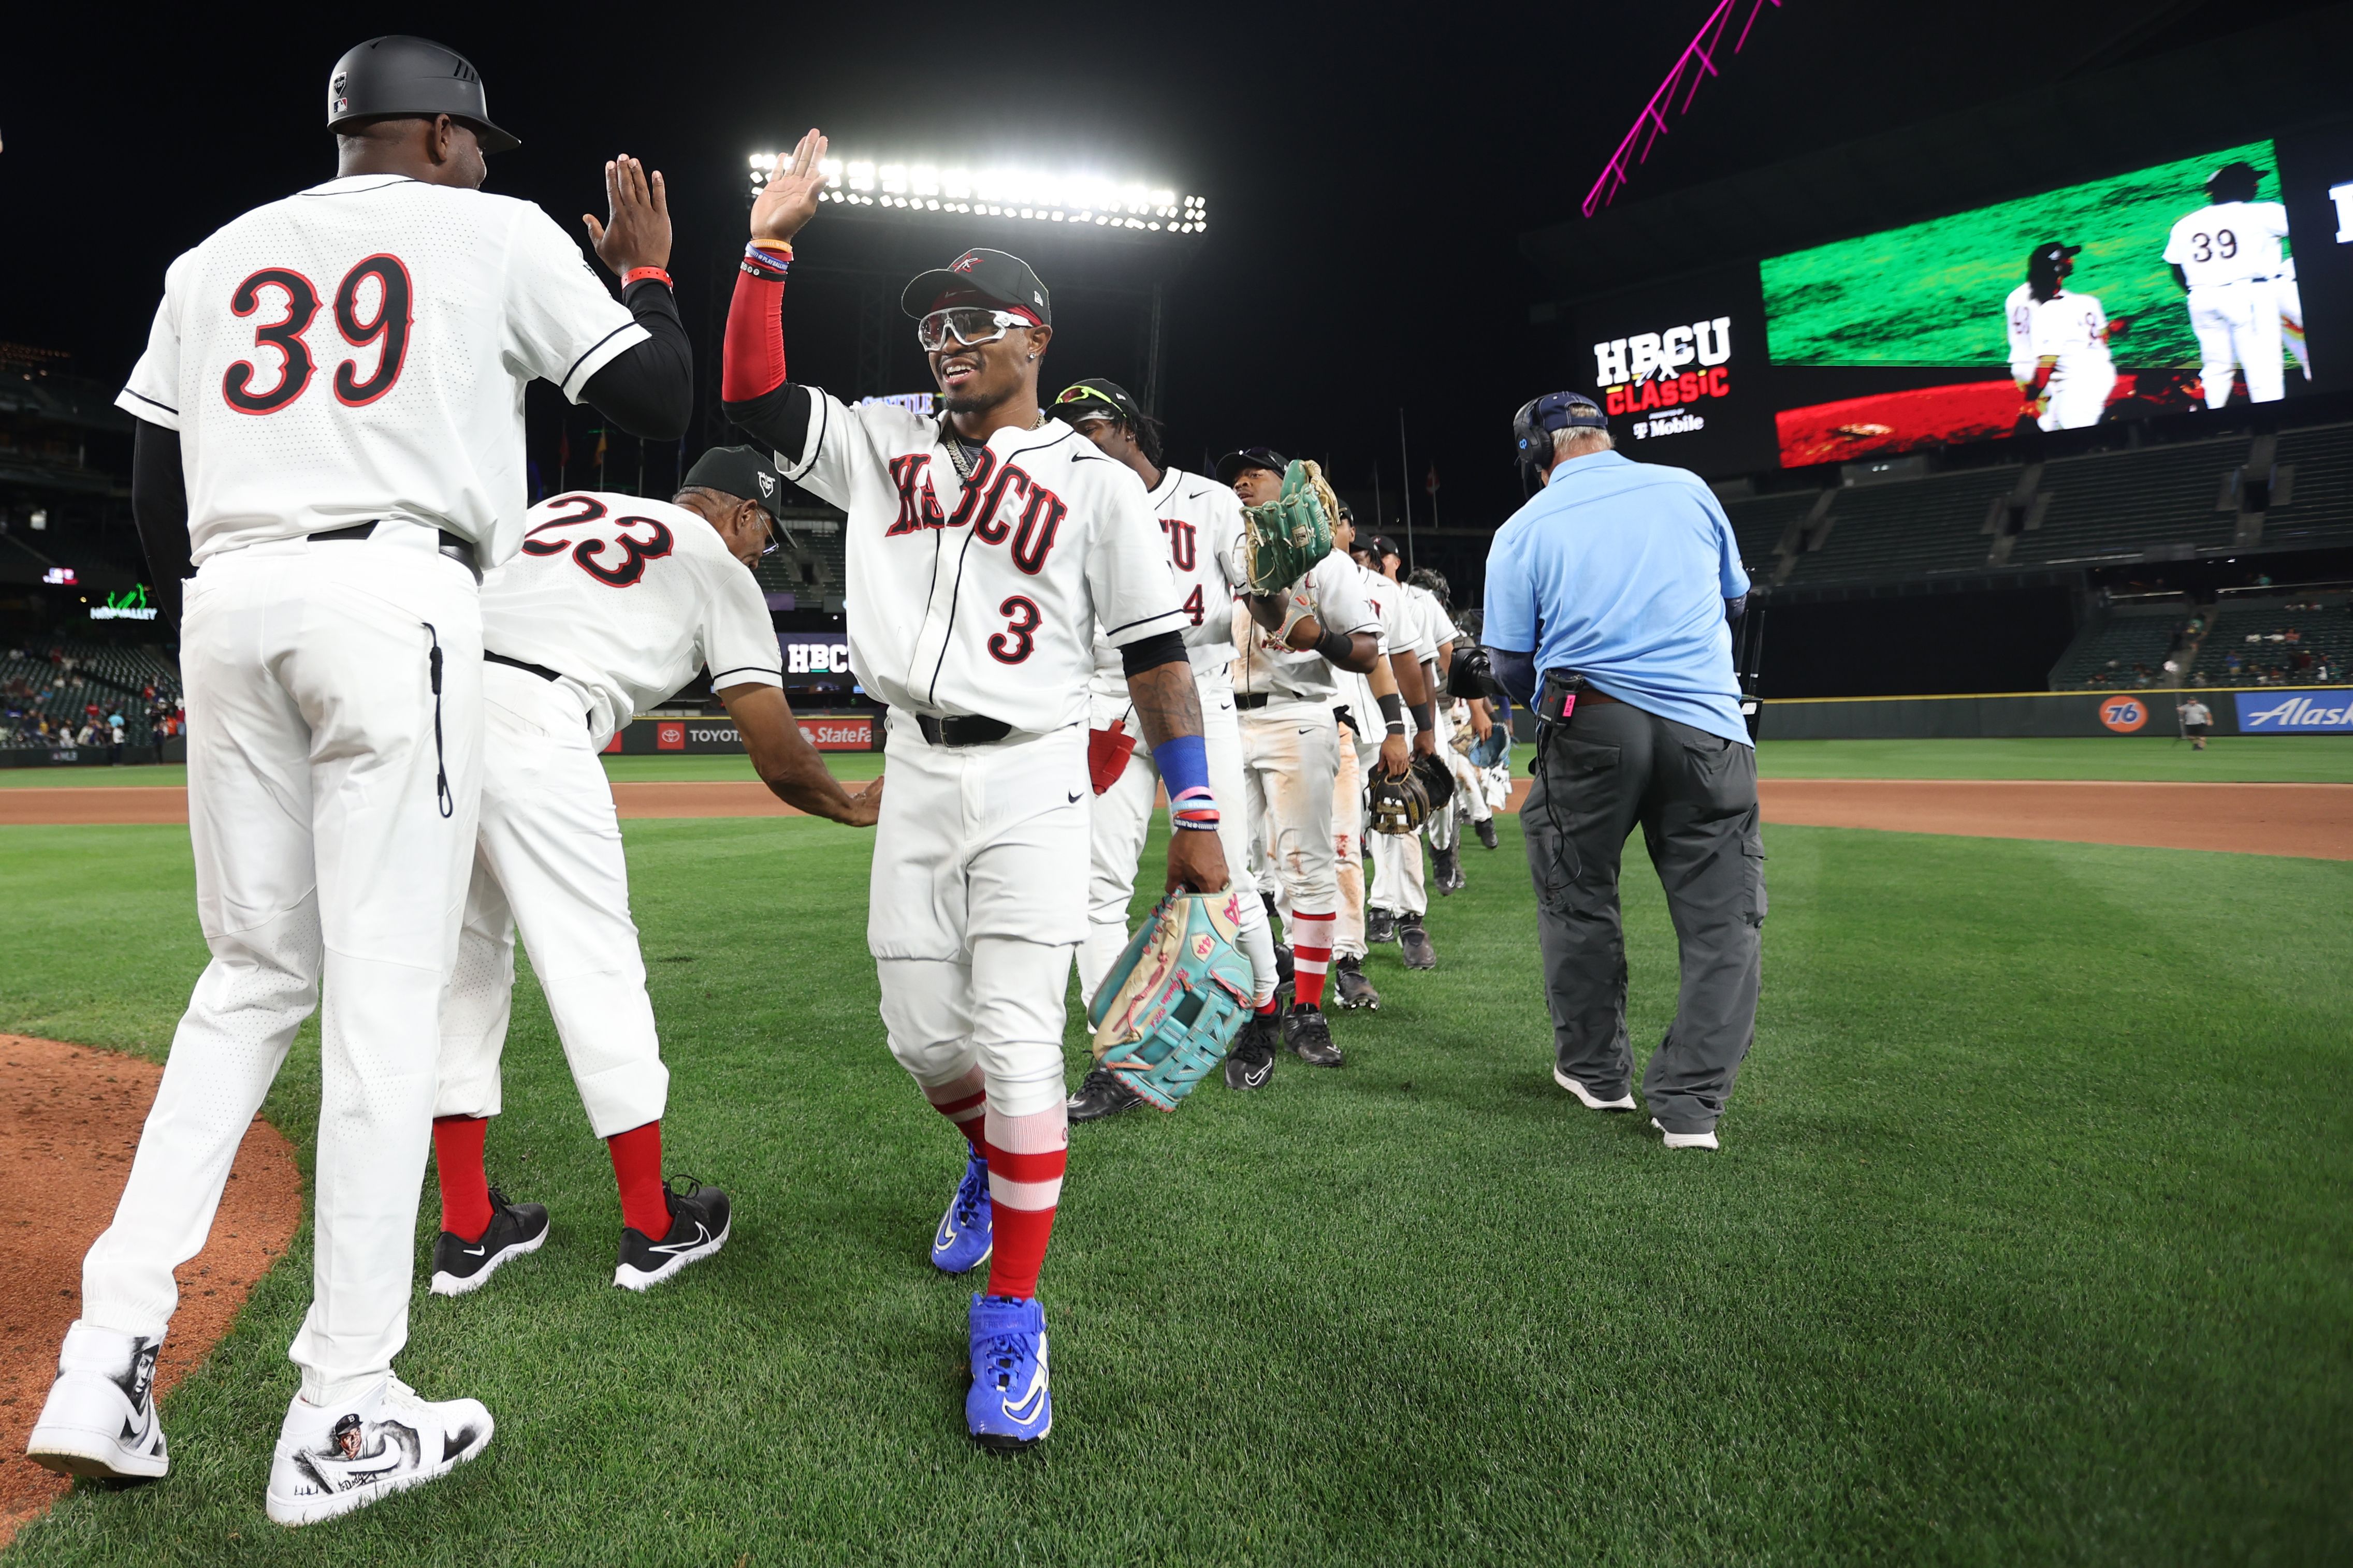 Players in white and red jerseys high five on the diamond during a night time game.